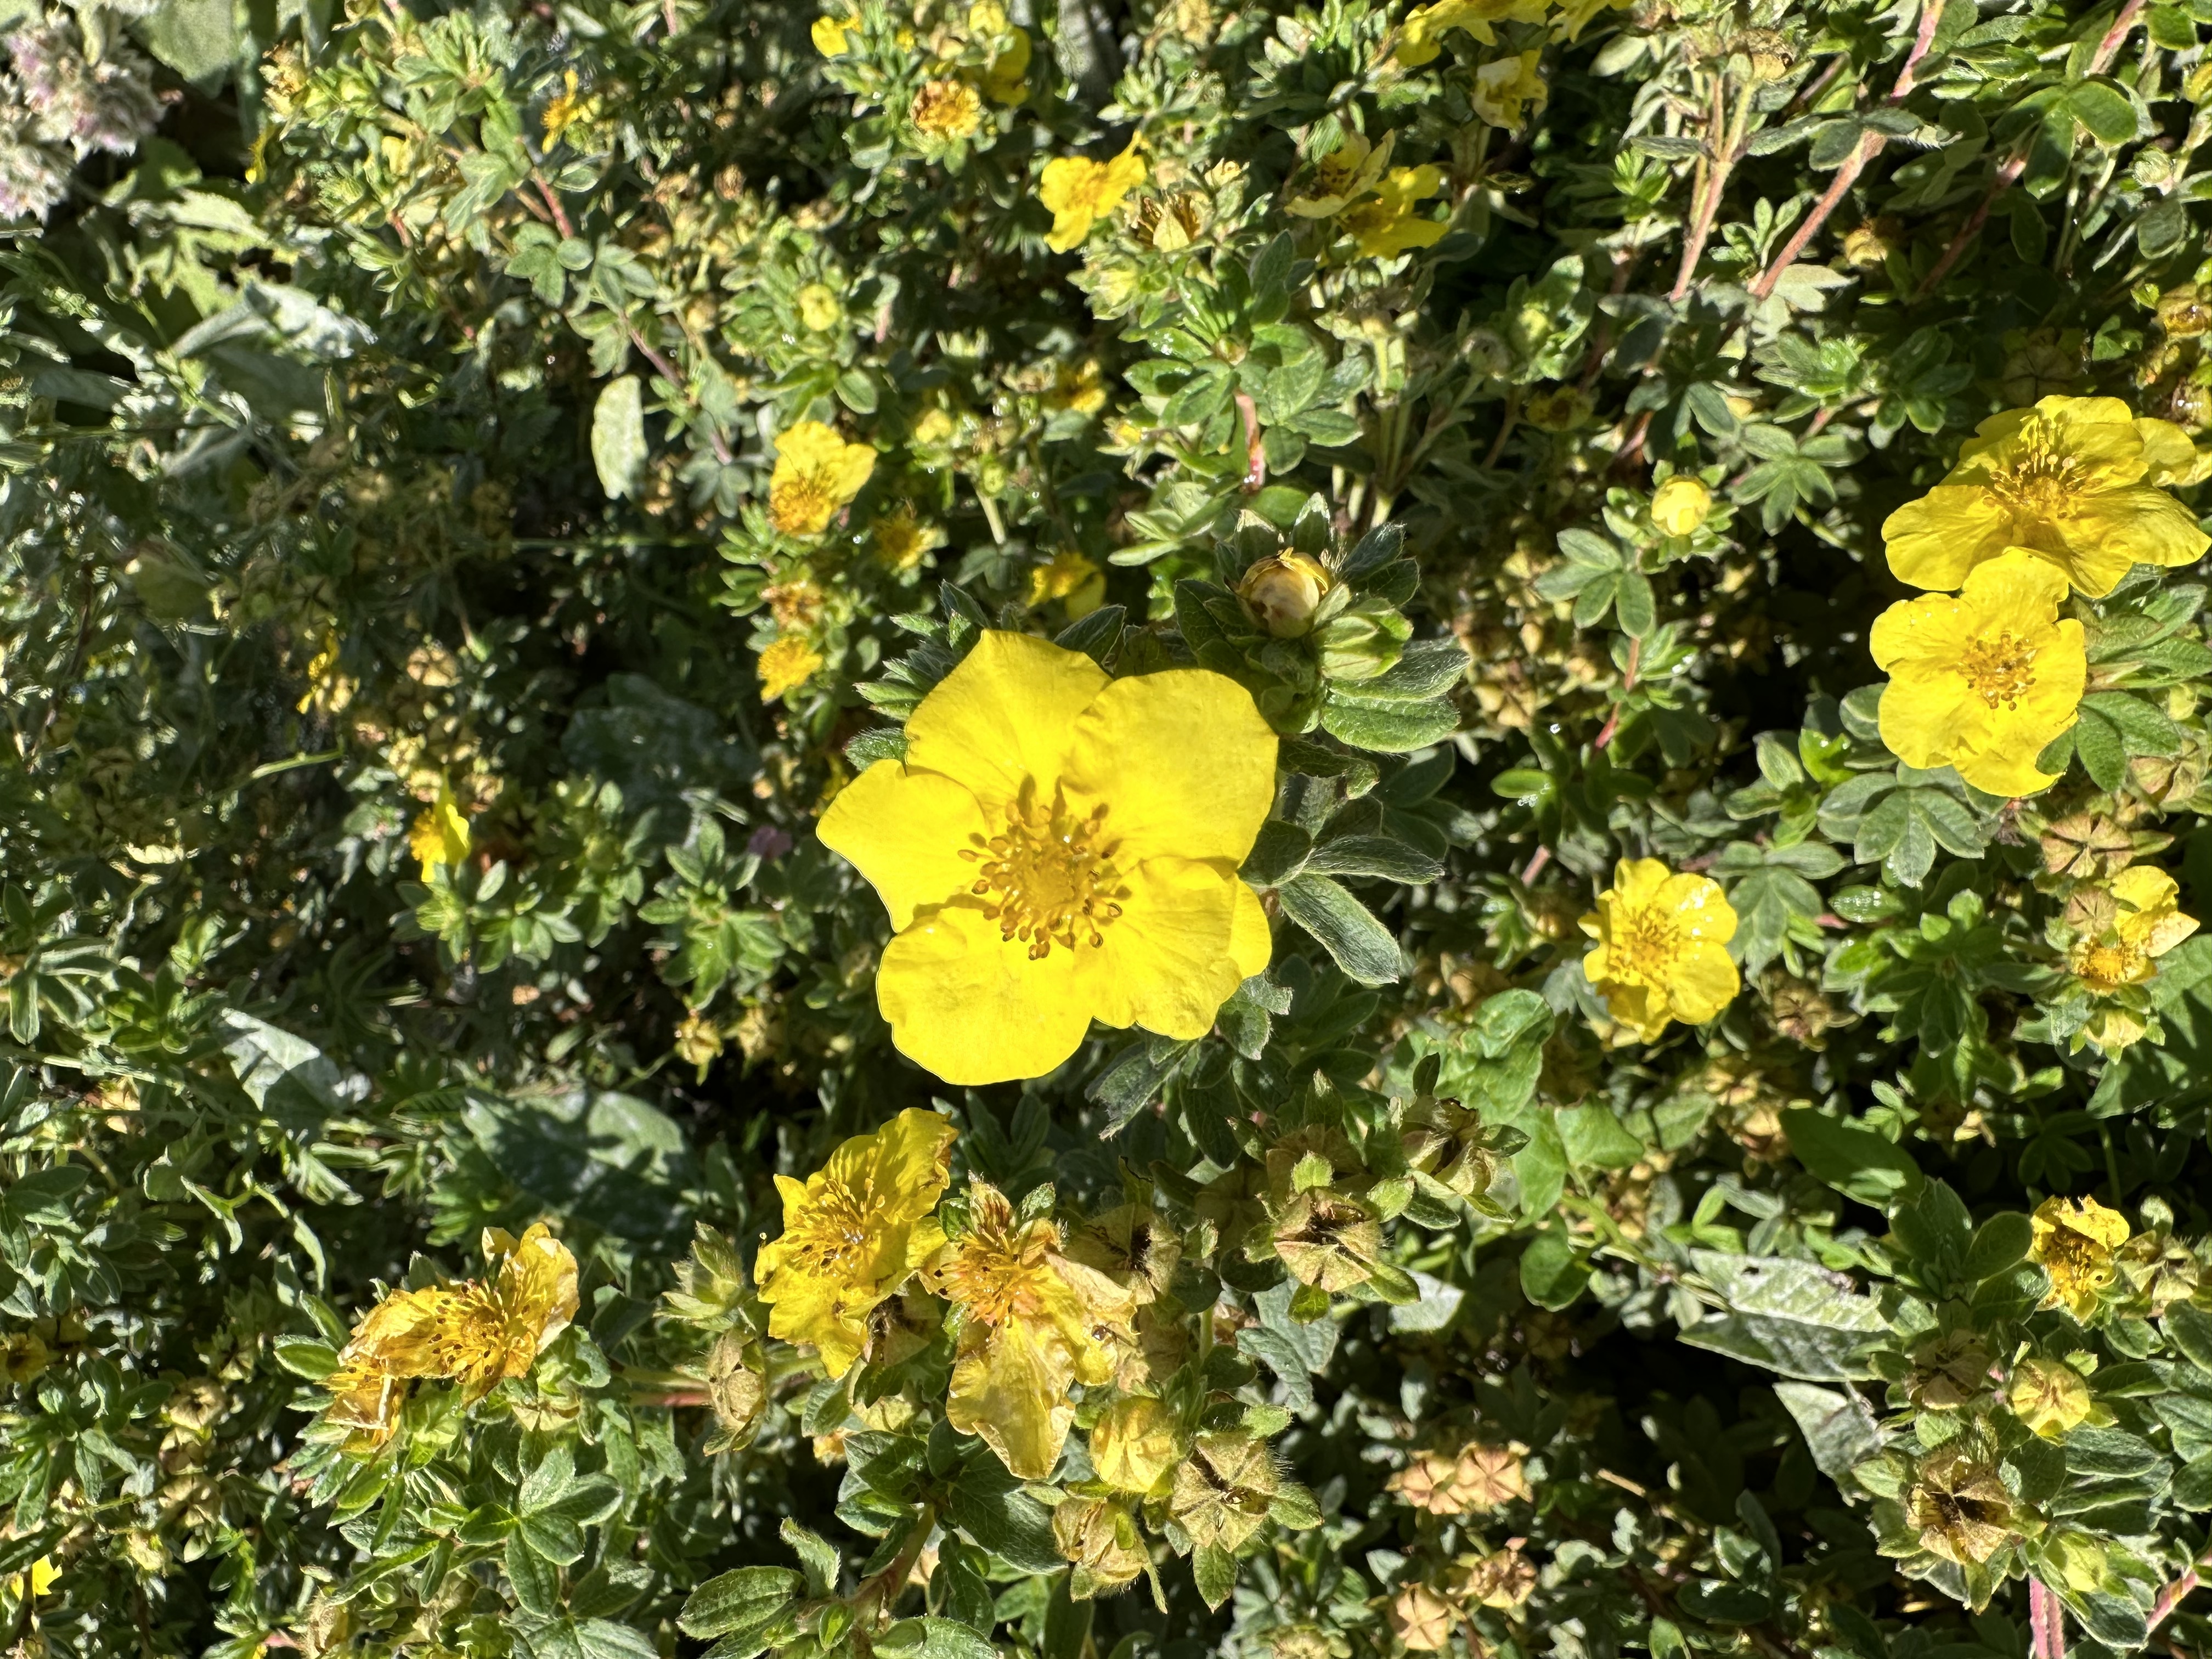 Yellow Gem Potentilla has bright yellow flowers and small, dark green leaves.